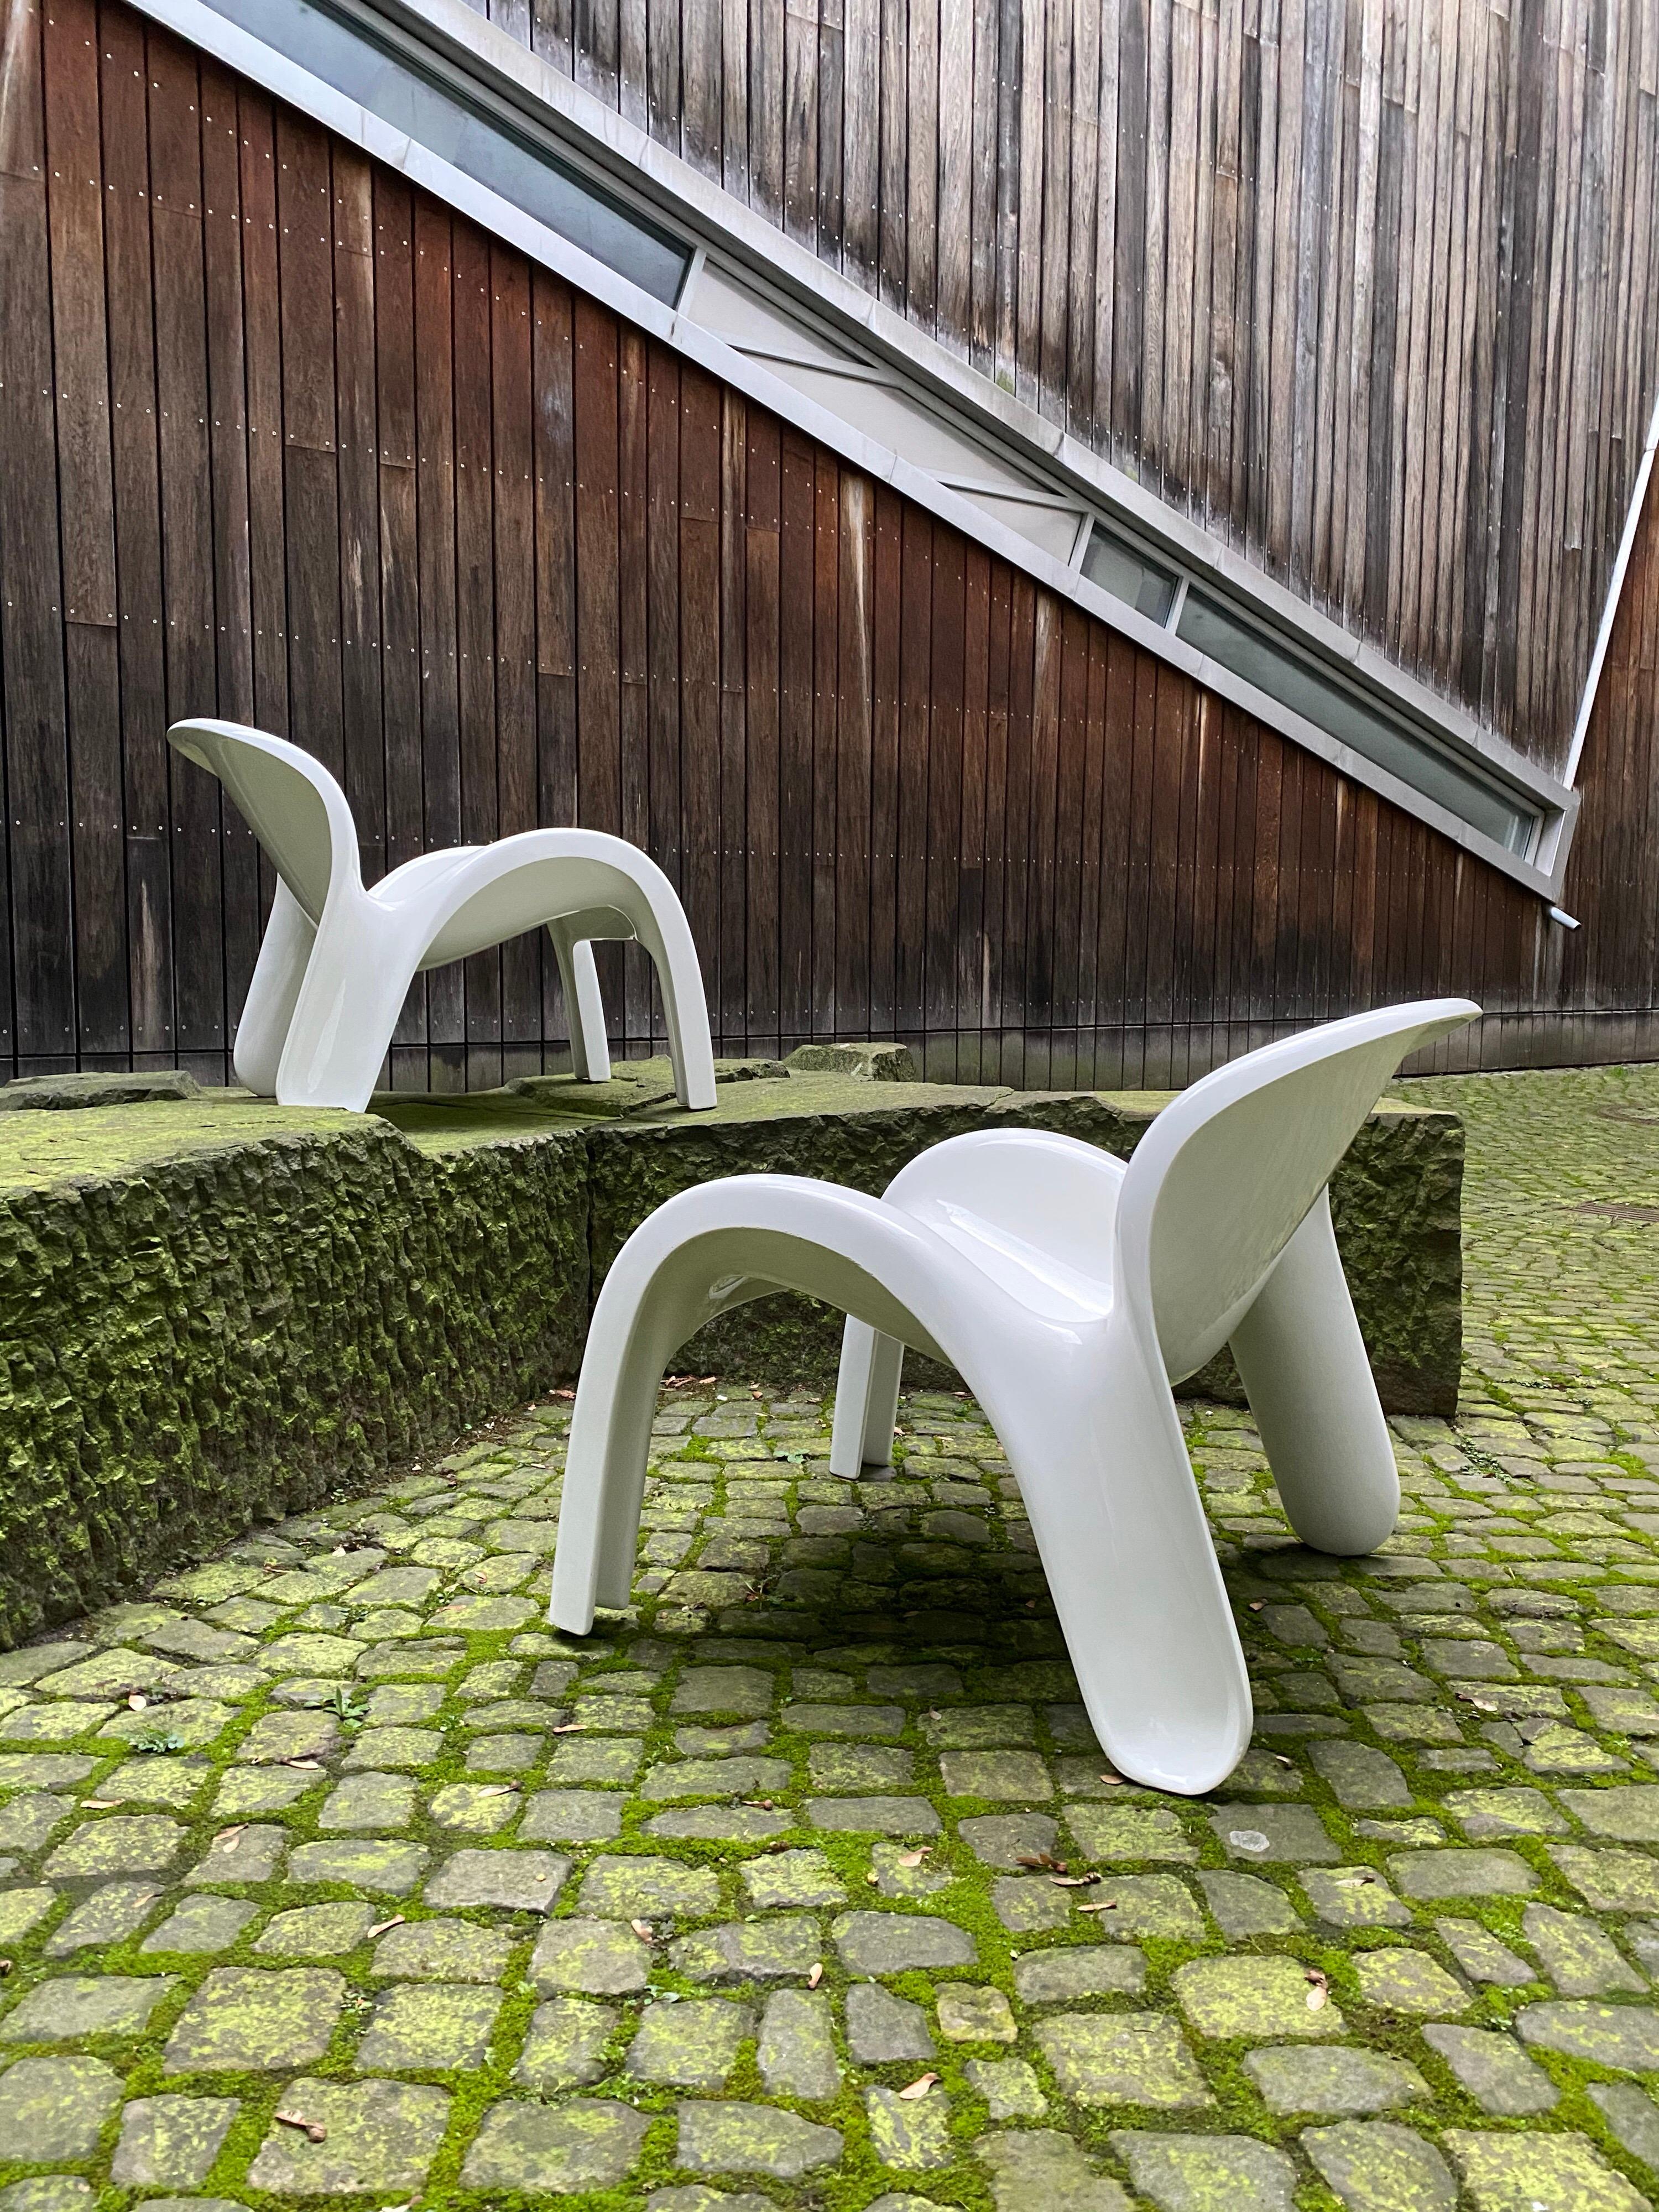 Made from moulded Polyurethane these chairs from Peter Ghyczy for Reuter, located in Lemförde, Germany, designed in the early 1970s for either indoor or outdoor.
They are a nice example for the futuristic furniture designs of this era.
Perfectly